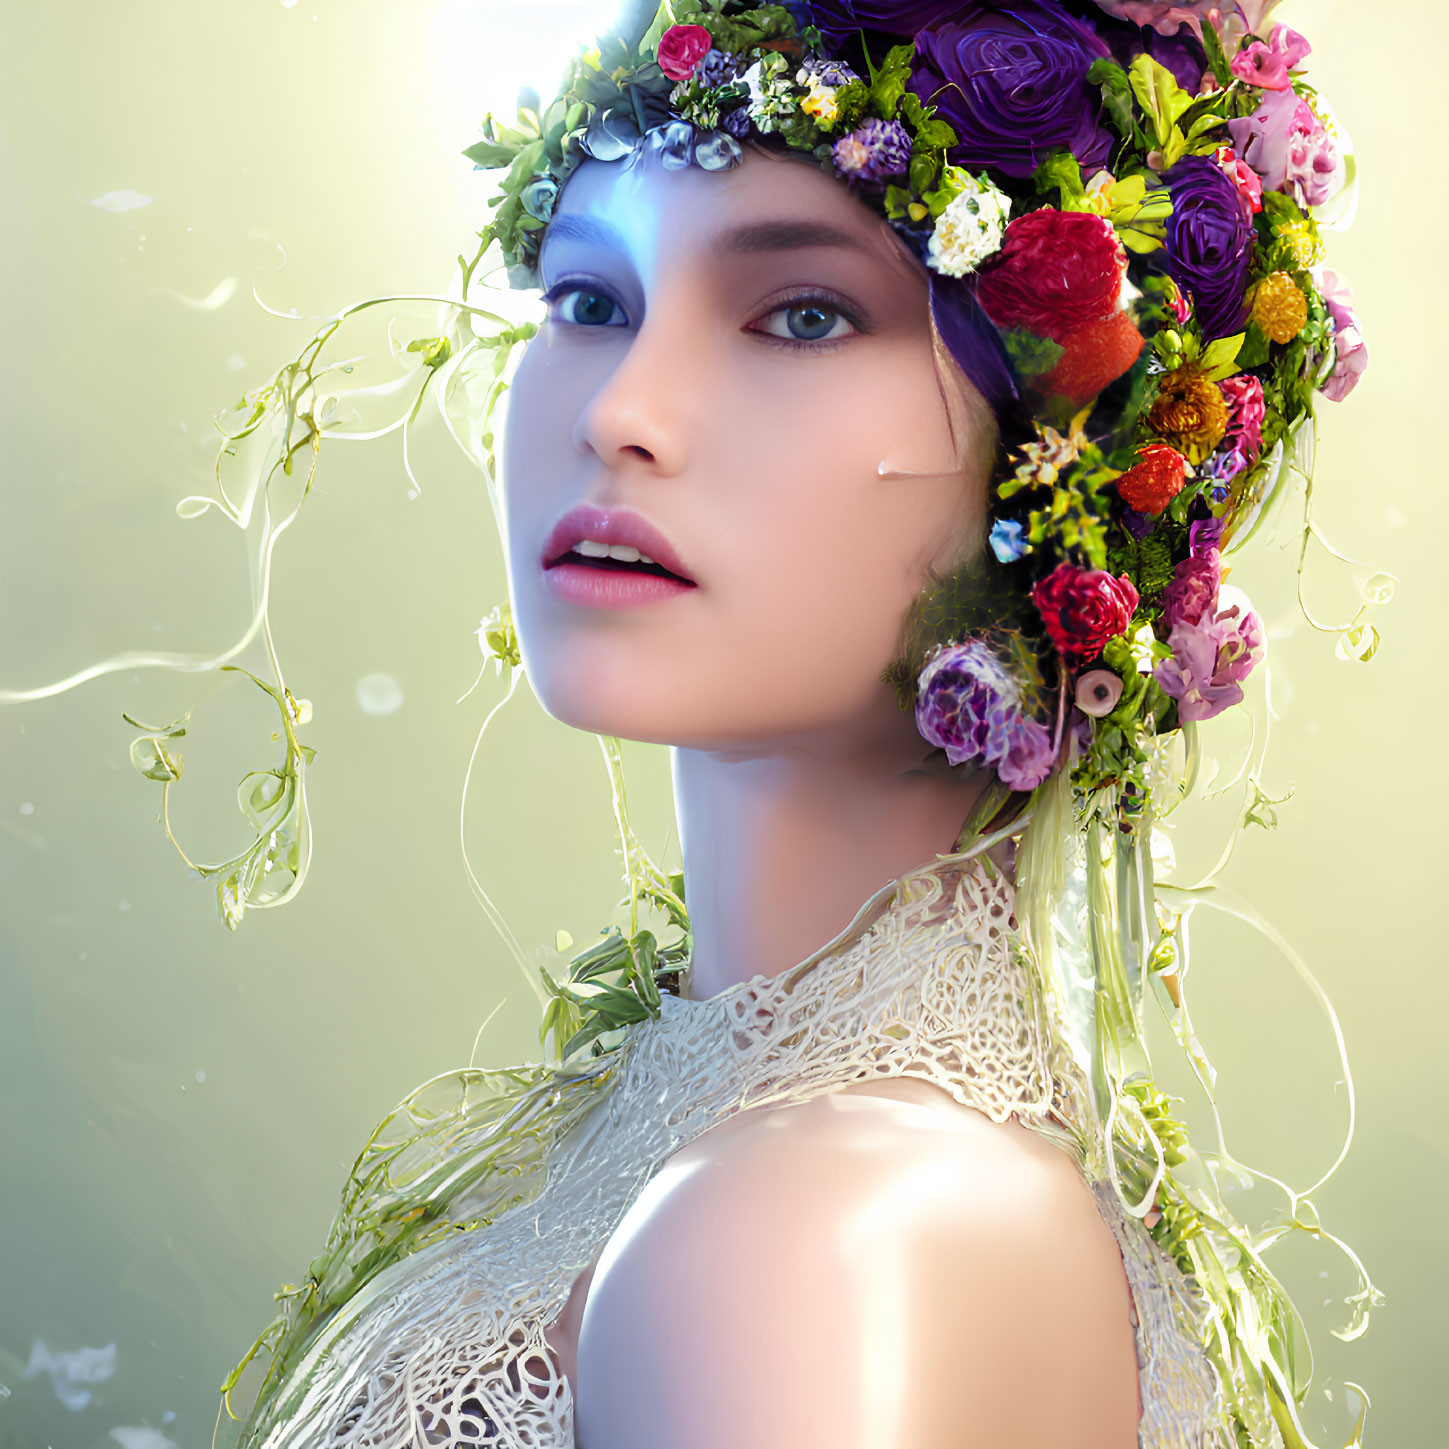 Woman with Floral Headdress and Vine-Like Adornments on Glowing Background